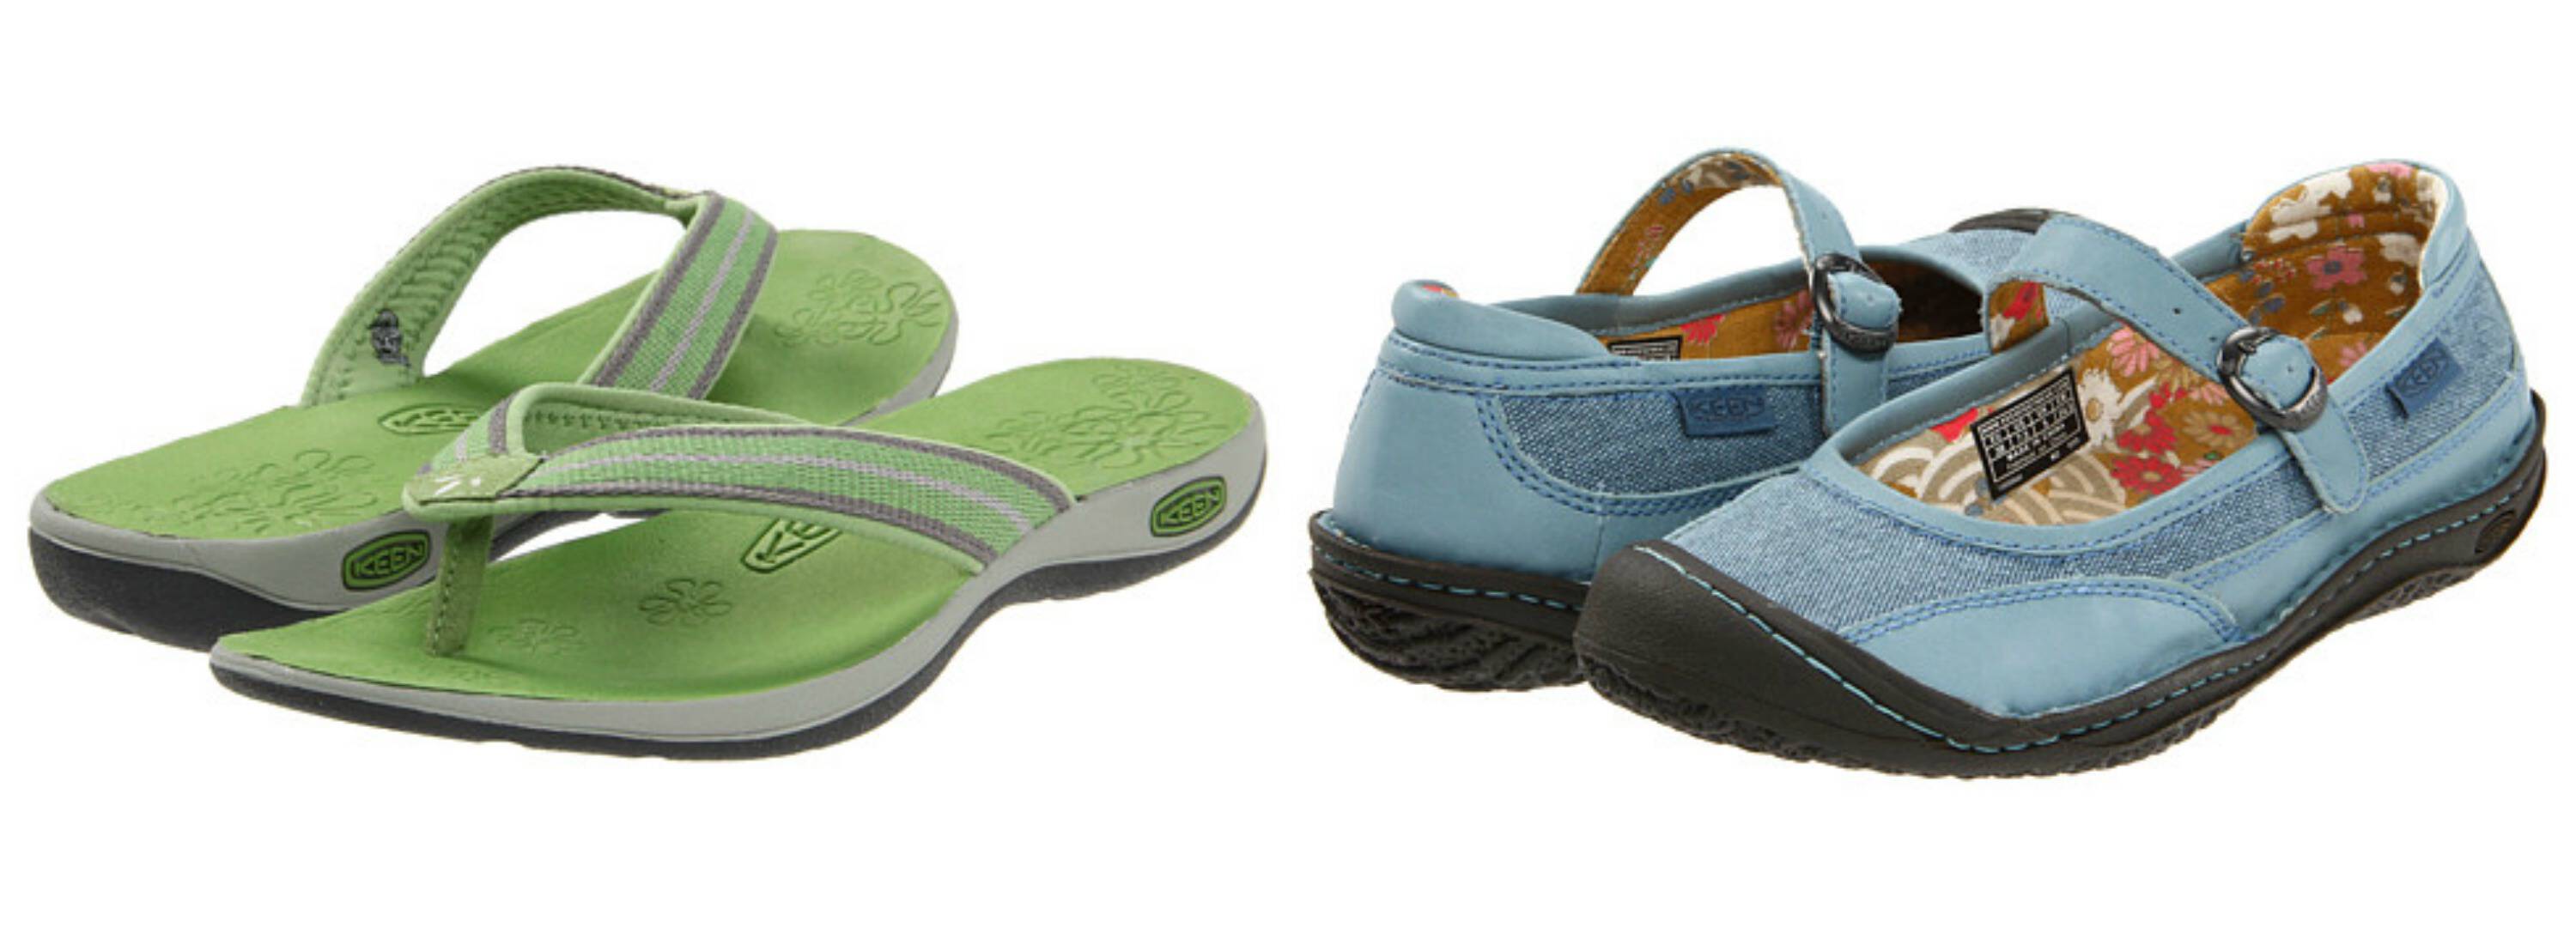 keen sandals on sale